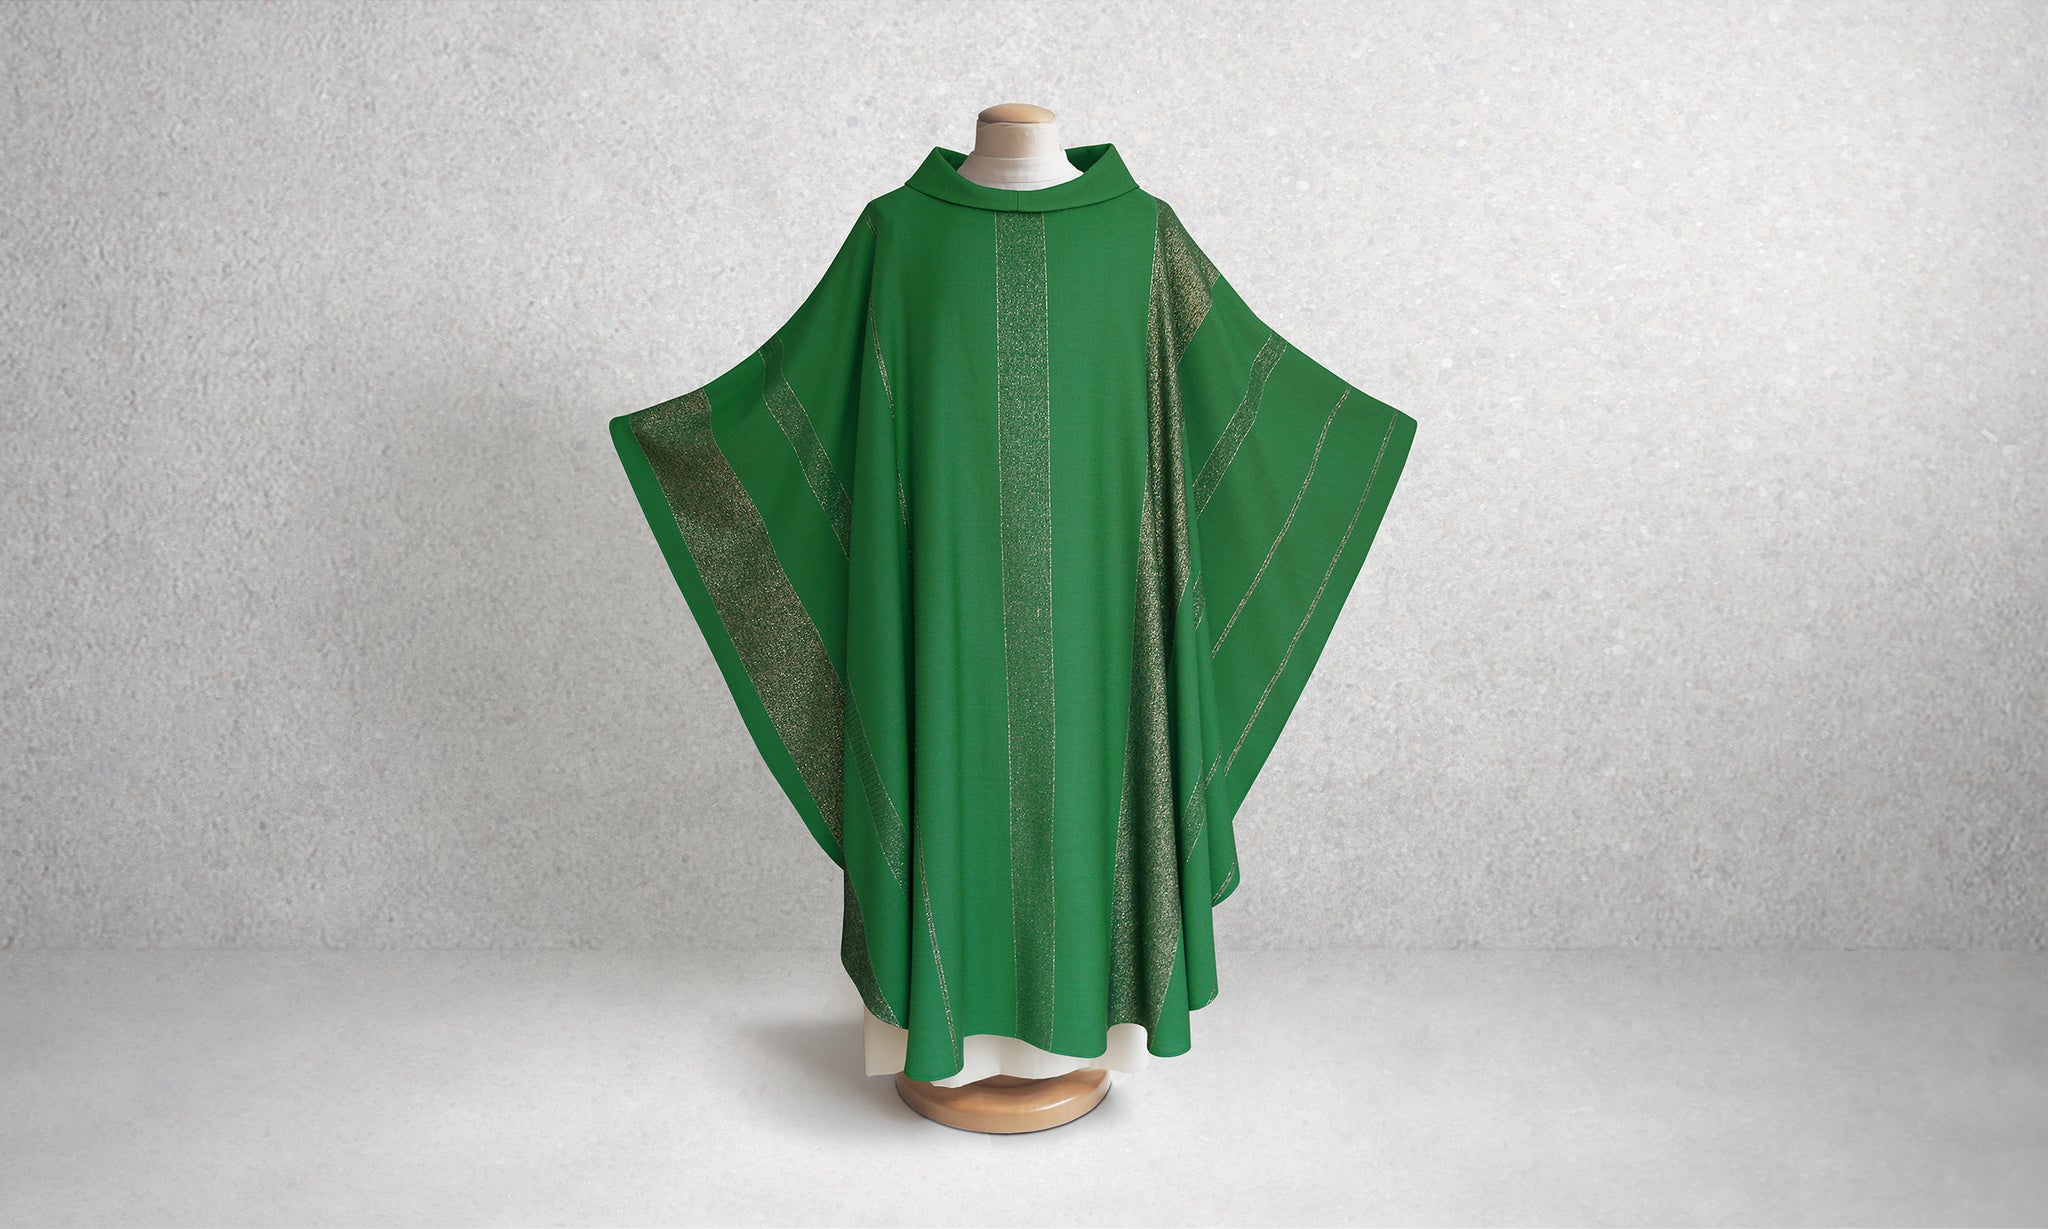 Beaulieux Woven Chasuble in Green